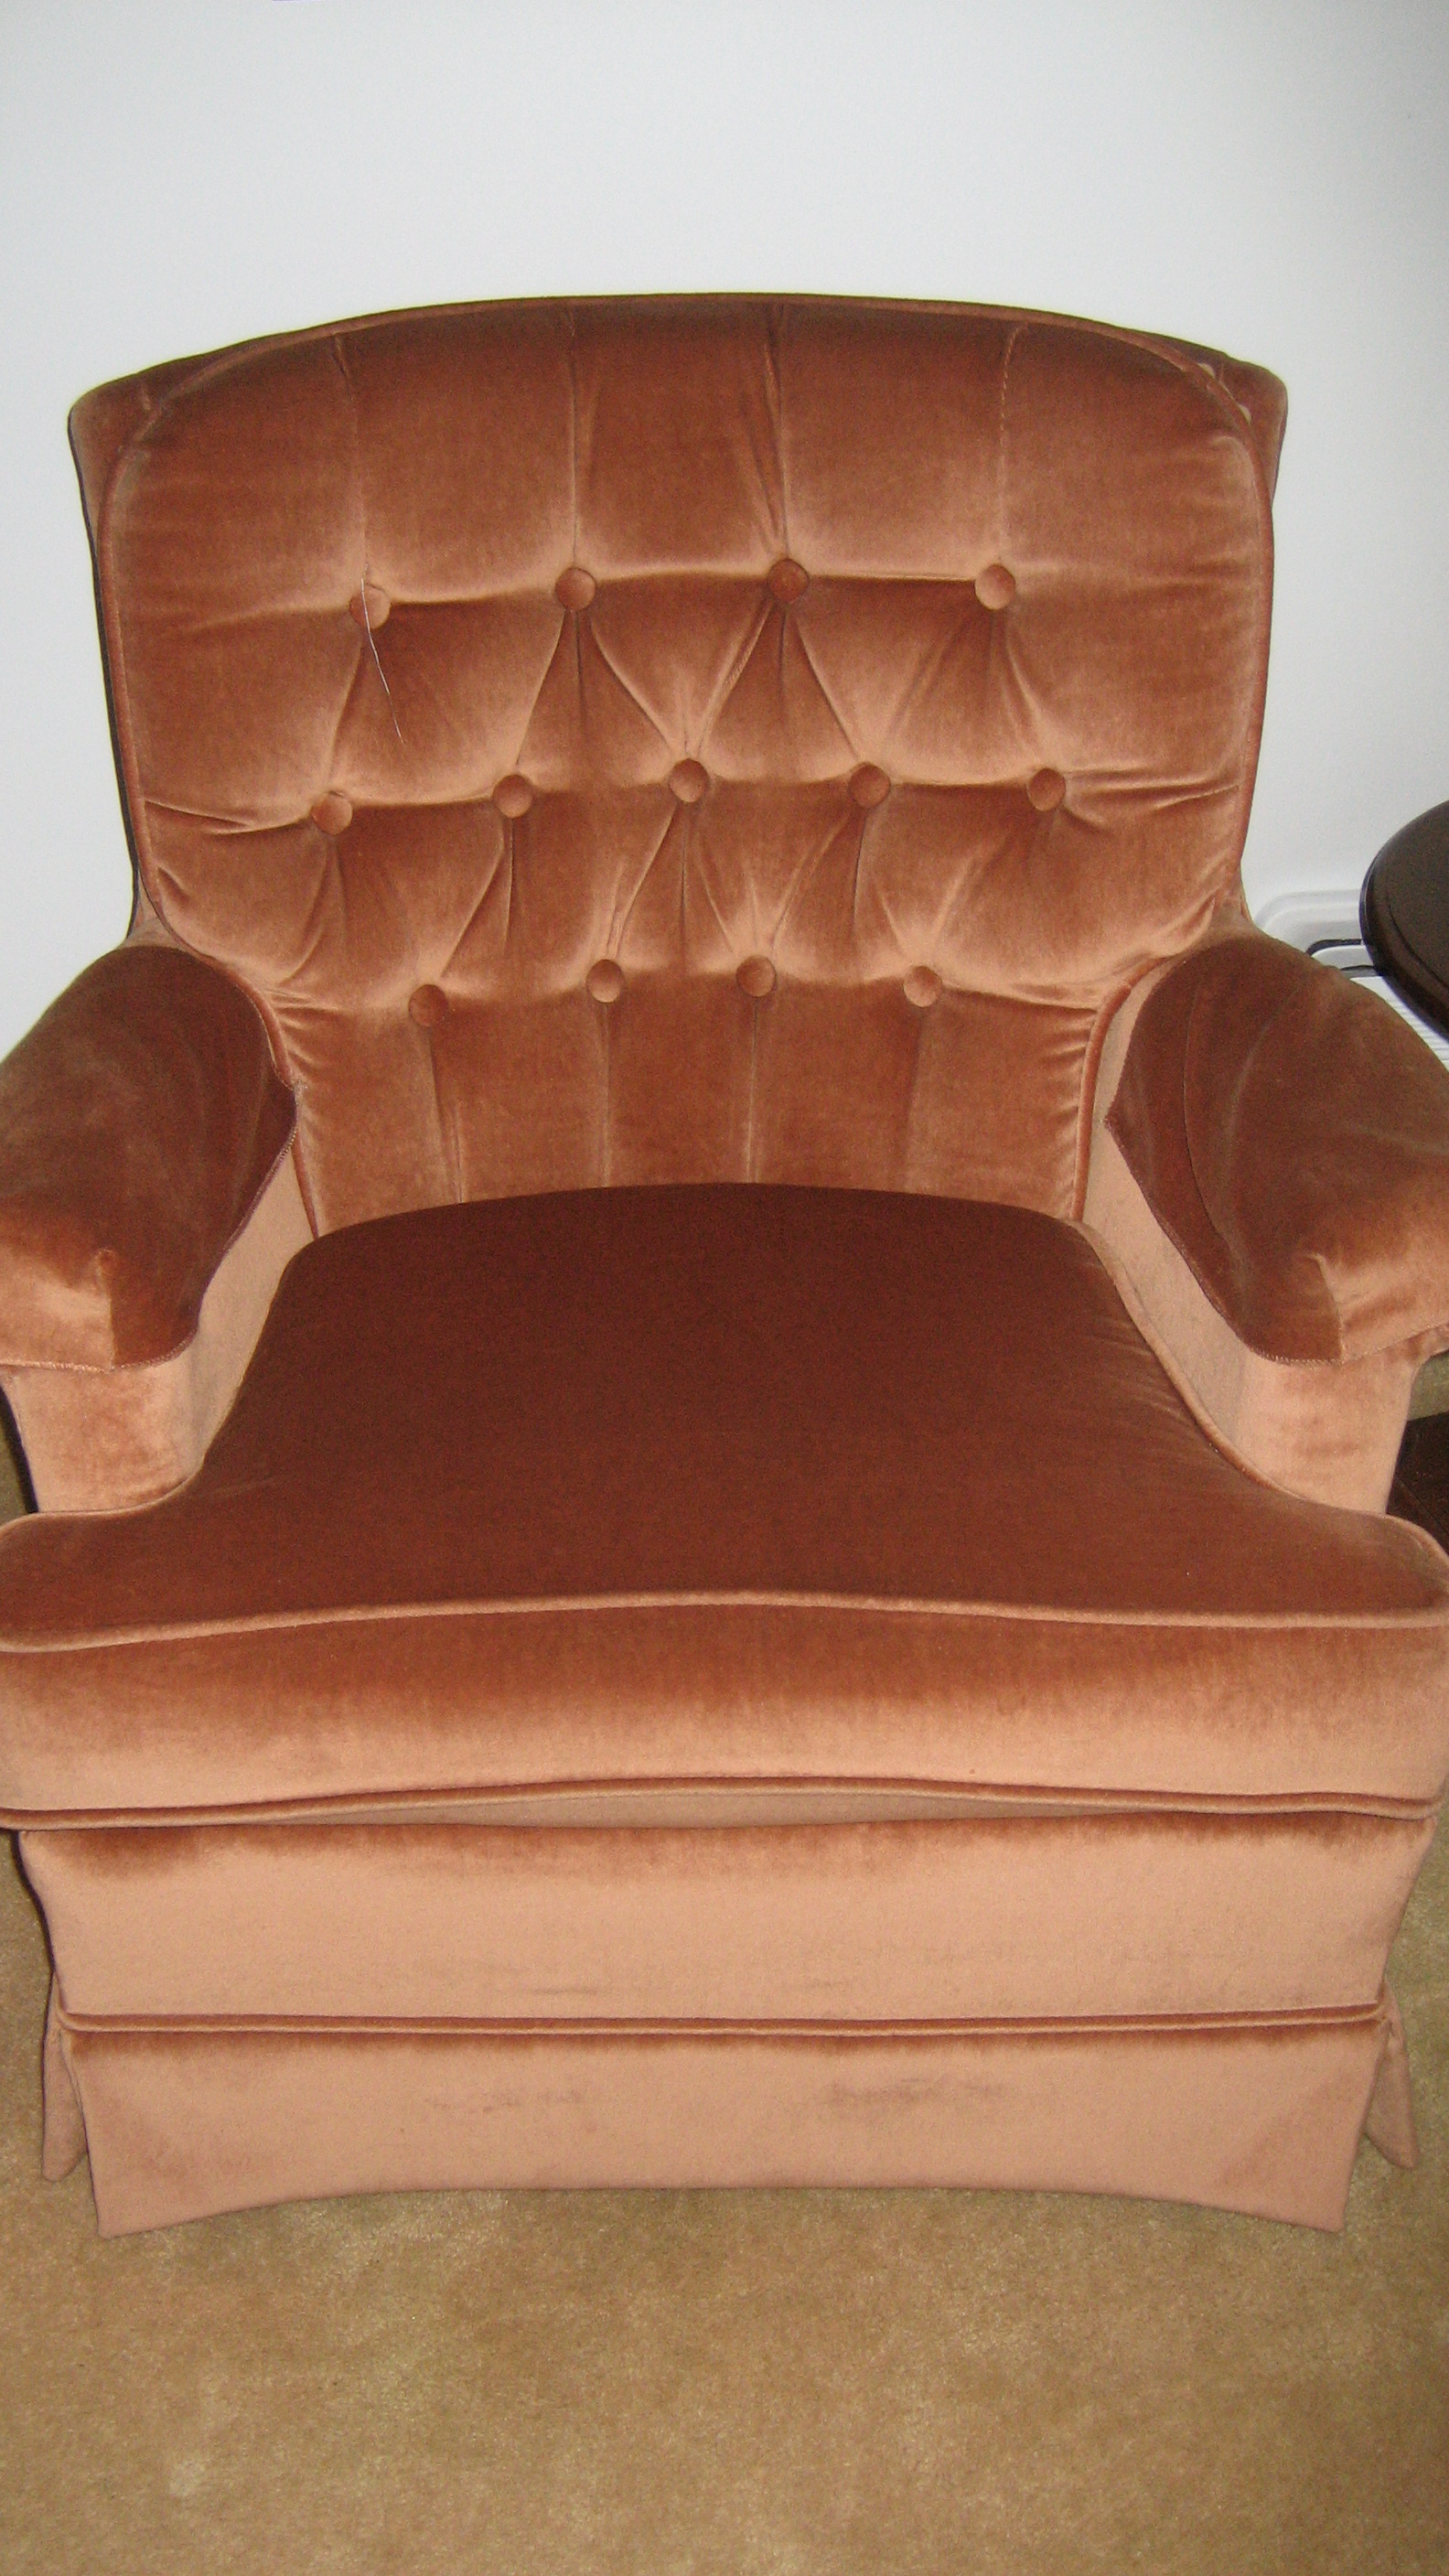 Chair for living room or bedroom